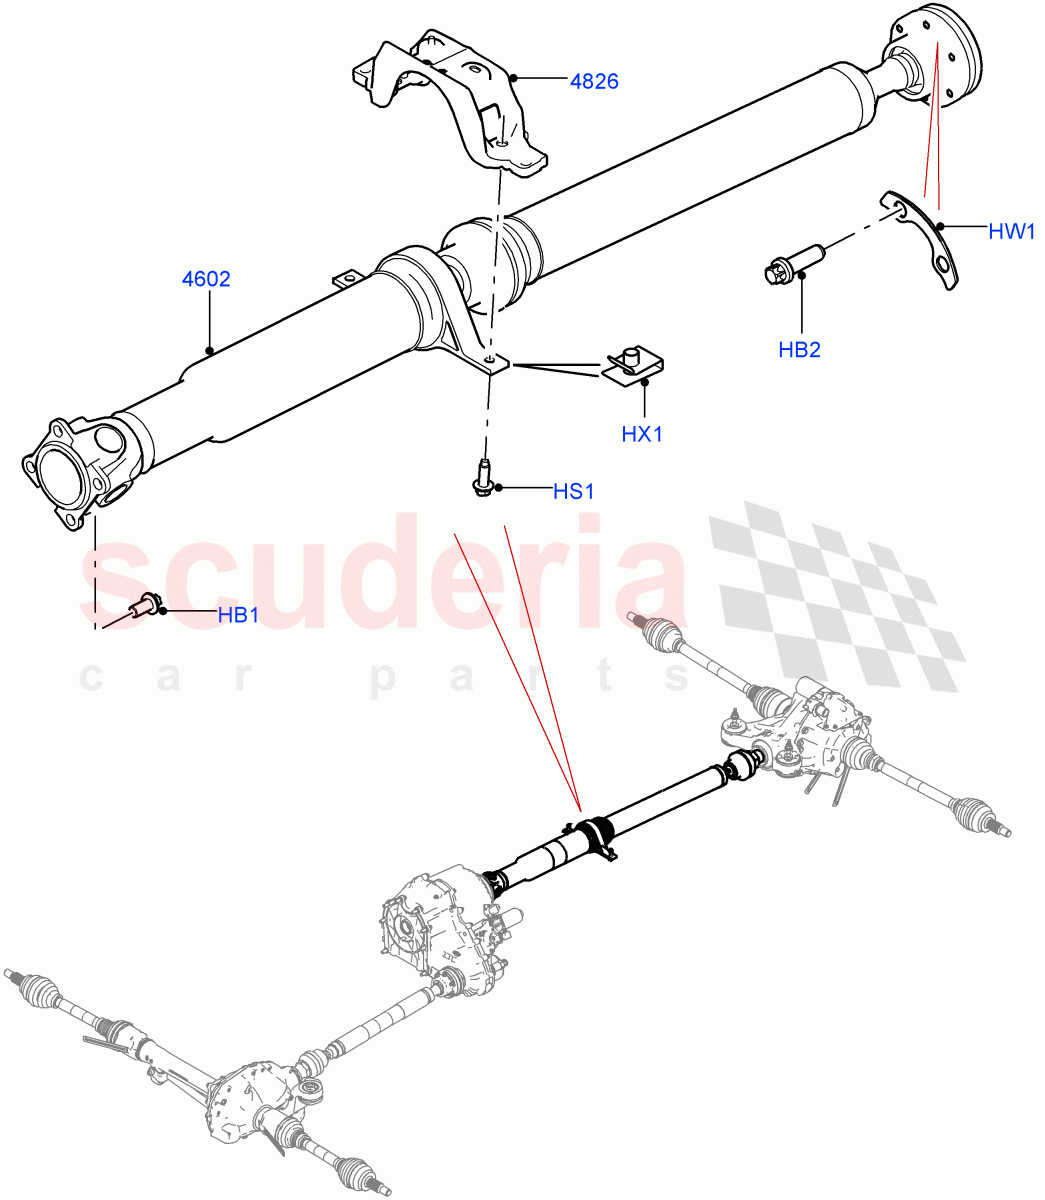 Drive Shaft - Rear Axle Drive(Solihull Plant Build, Propshaft)((V)FROMHA000001) of Land Rover Land Rover Discovery 5 (2017+) [2.0 Turbo Diesel]